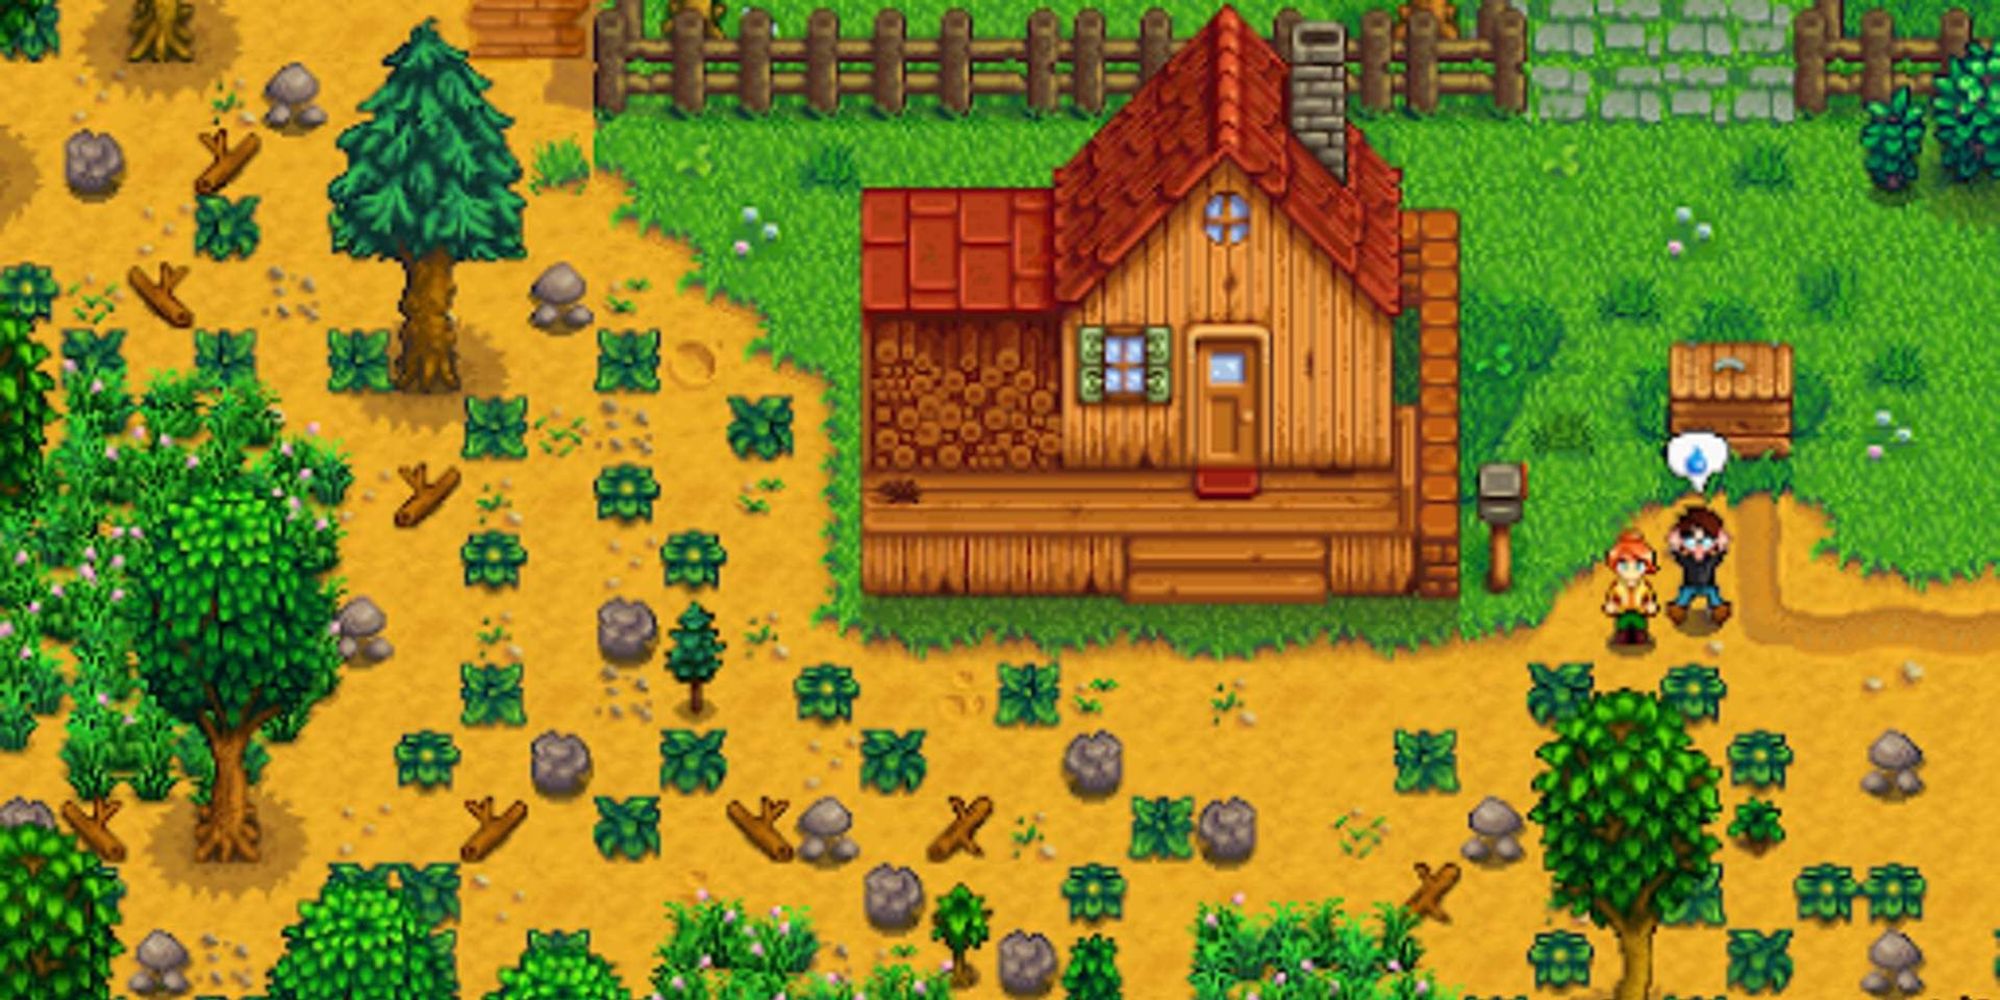 player looking at their overgrown farm with robin